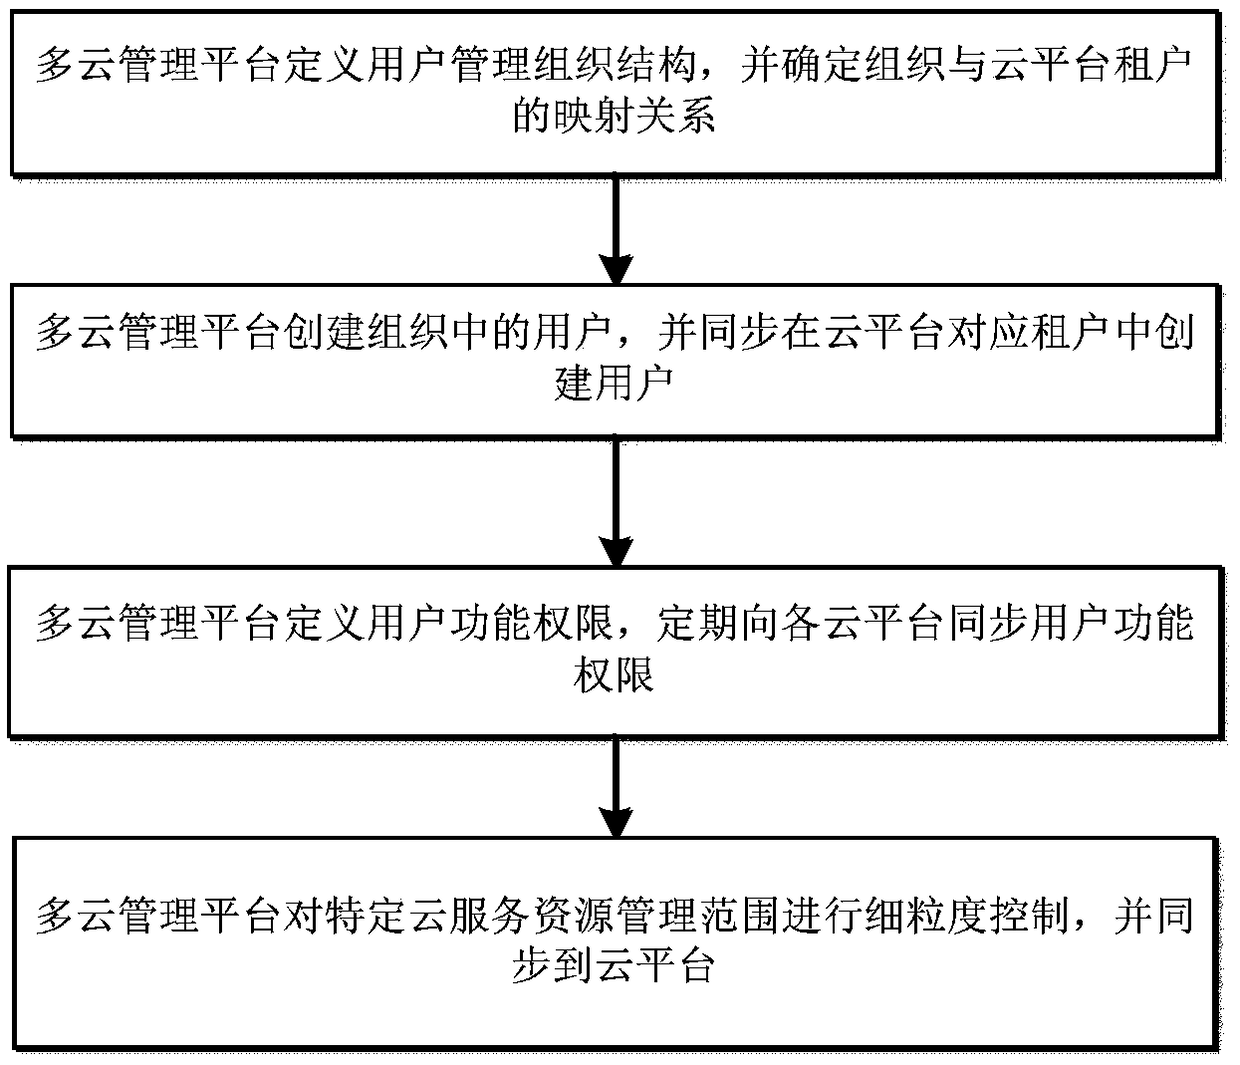 A user synchronization and privilege control method suitable for multi-cloud management